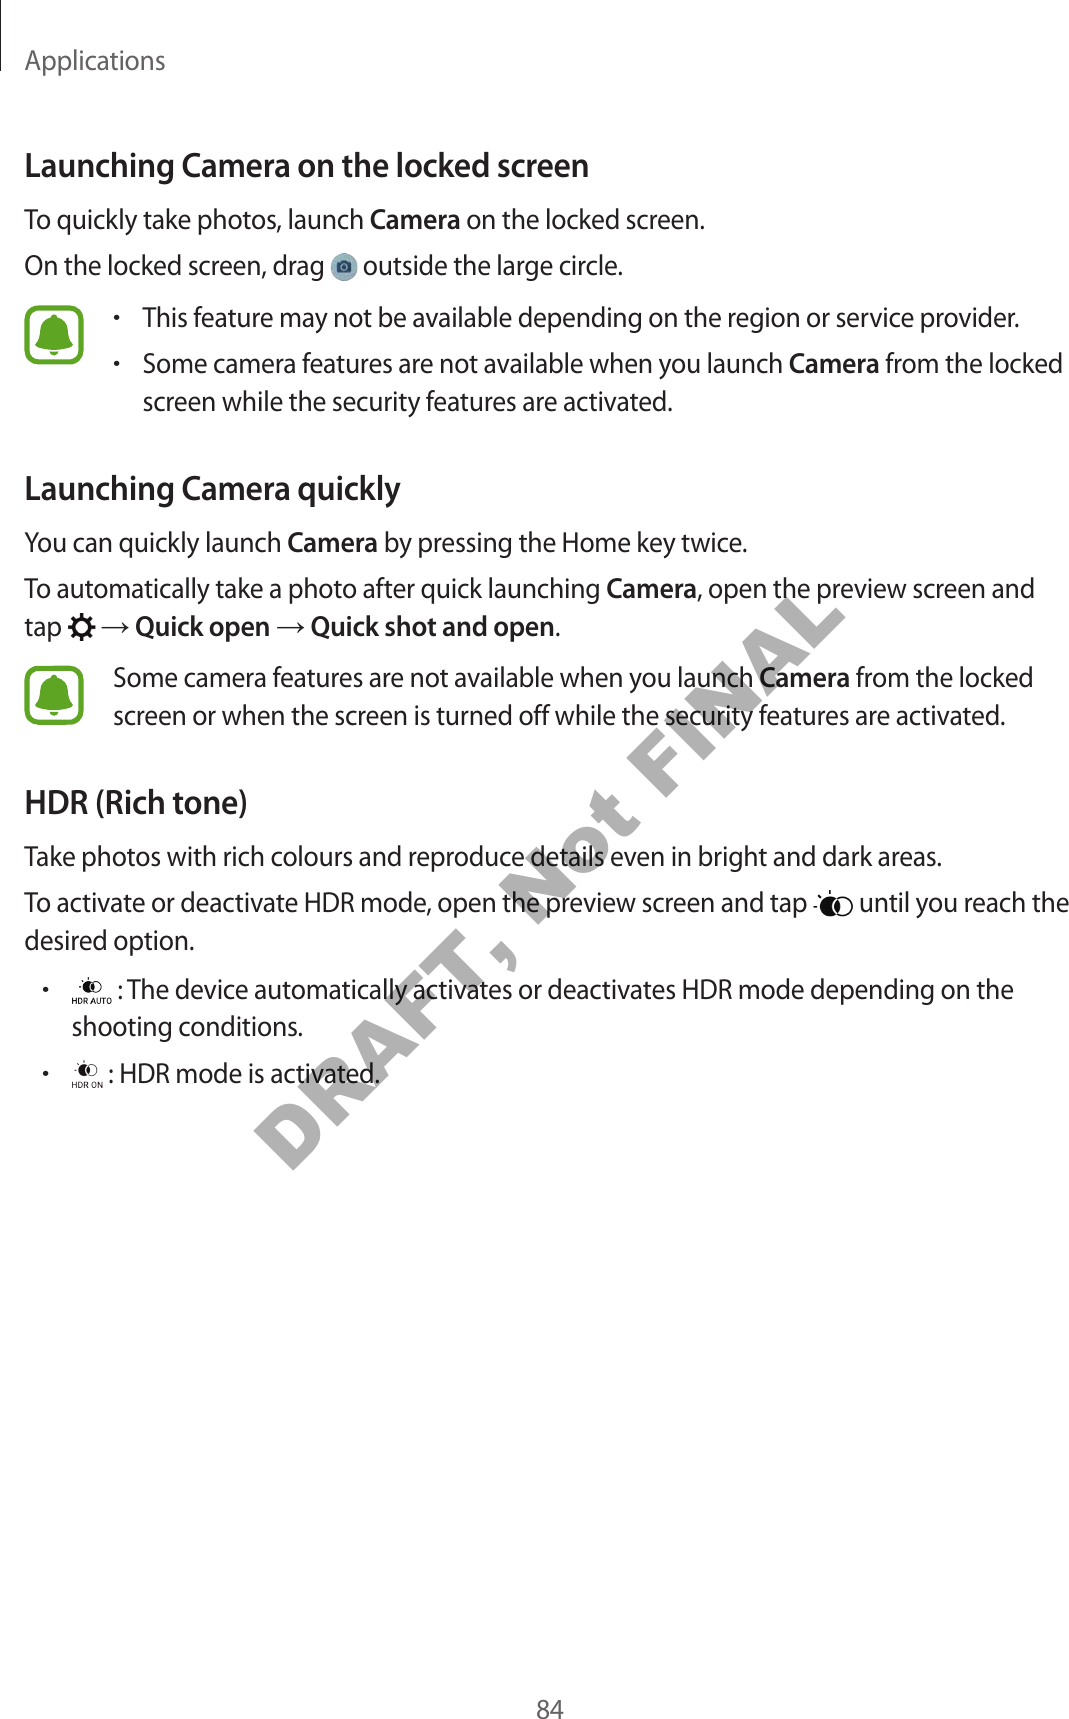 Applications84Launching Camera on the locked screenTo quickly take photos, launch Camera on the locked screen.On the locked screen, drag   outside the large circle.•This feature may not be available depending on the region or service provider.•Some camera features are not available when you launch Camera from the locked screen while the security features are activated.Launching Camera quicklyYou can quickly launch Camera by pressing the Home key twice.To automatically take a photo after quick launching Camera, open the preview screen and tap   → Quick open → Quick shot and open.Some camera features are not available when you launch Camera from the locked screen or when the screen is turned off while the security features are activated.HDR (Rich tone)Take photos with rich colours and reproduce details even in bright and dark areas.To activate or deactivate HDR mode, open the preview screen and tap   until you reach the desired option.• : The device automatically activates or deactivates HDR mode depending on the shooting conditions.• : HDR mode is activated.DRAFT, Not FINAL